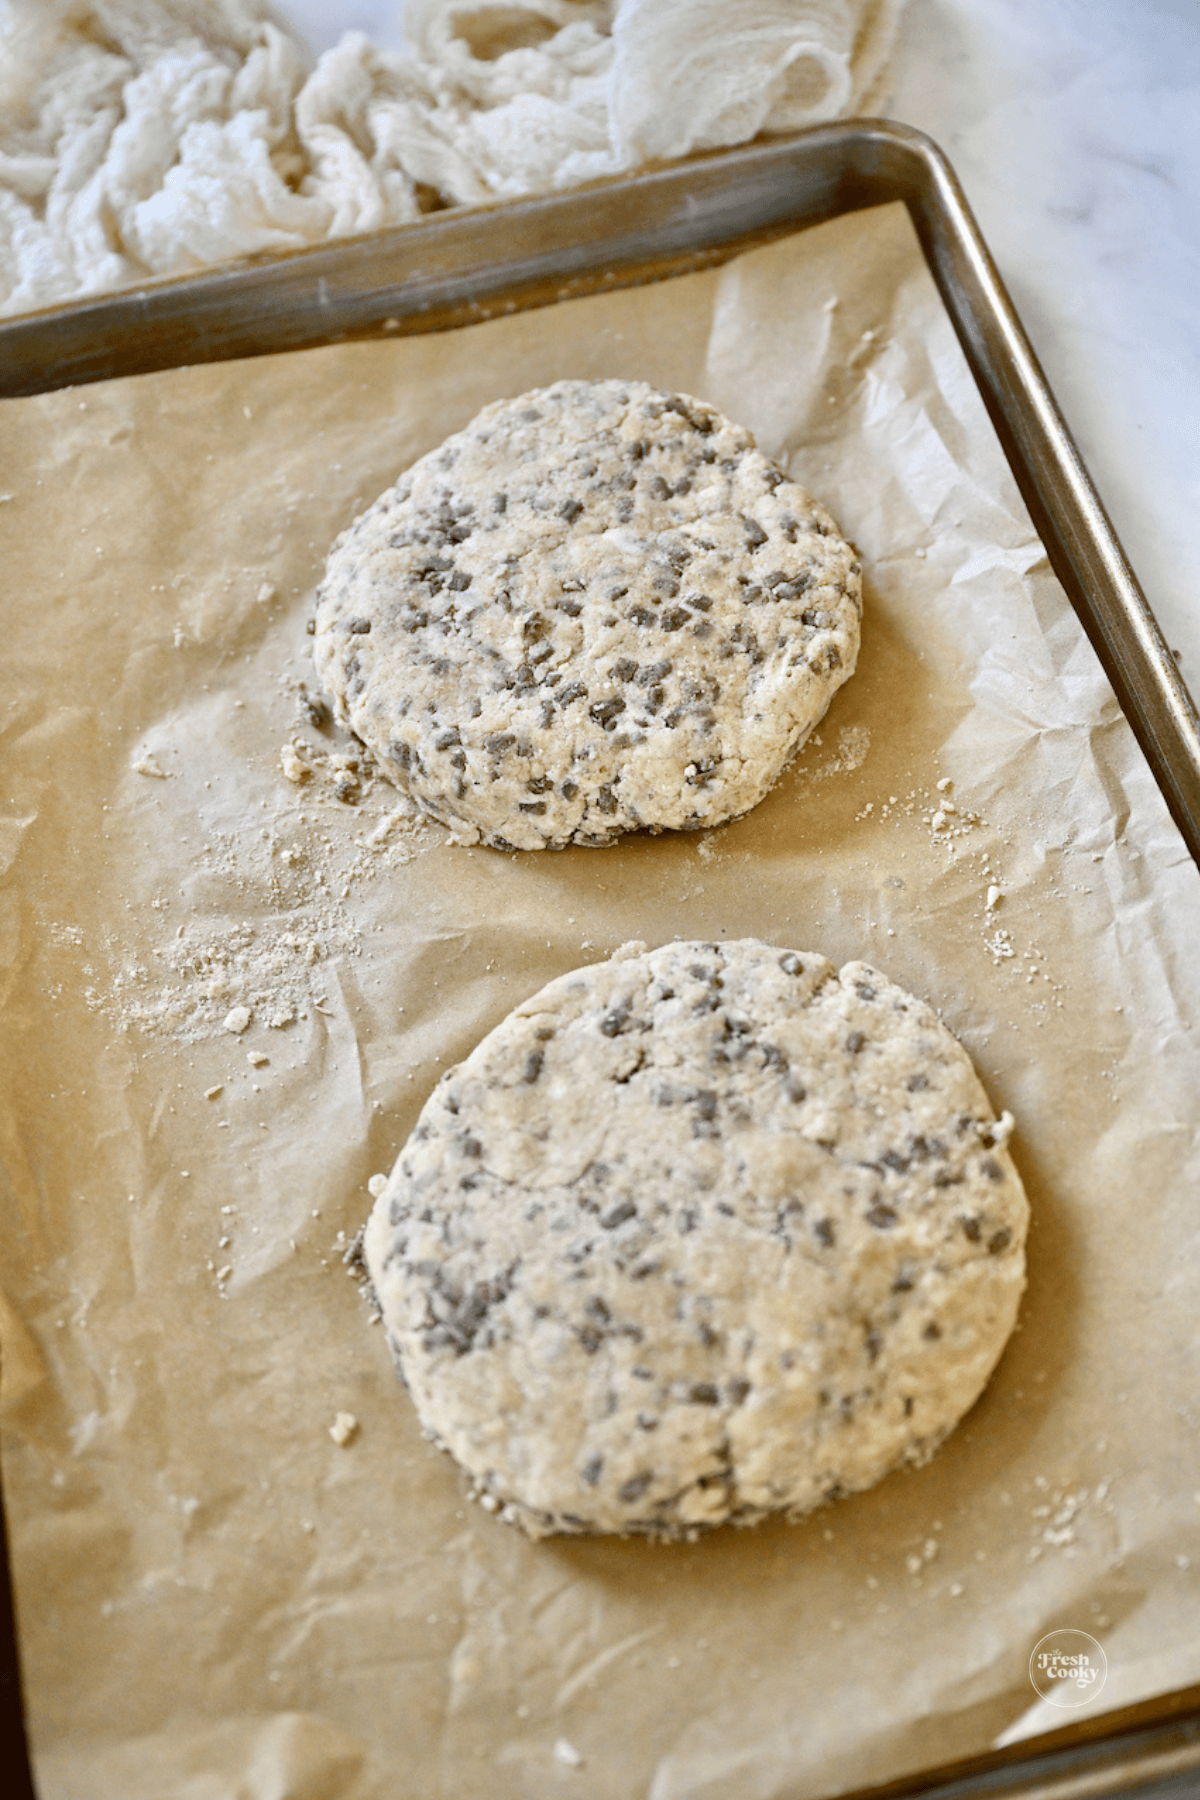 https://www.thefreshcooky.com/wp-content/uploads/2023/01/Two-scone-discs-on-baking-sheet-1.png